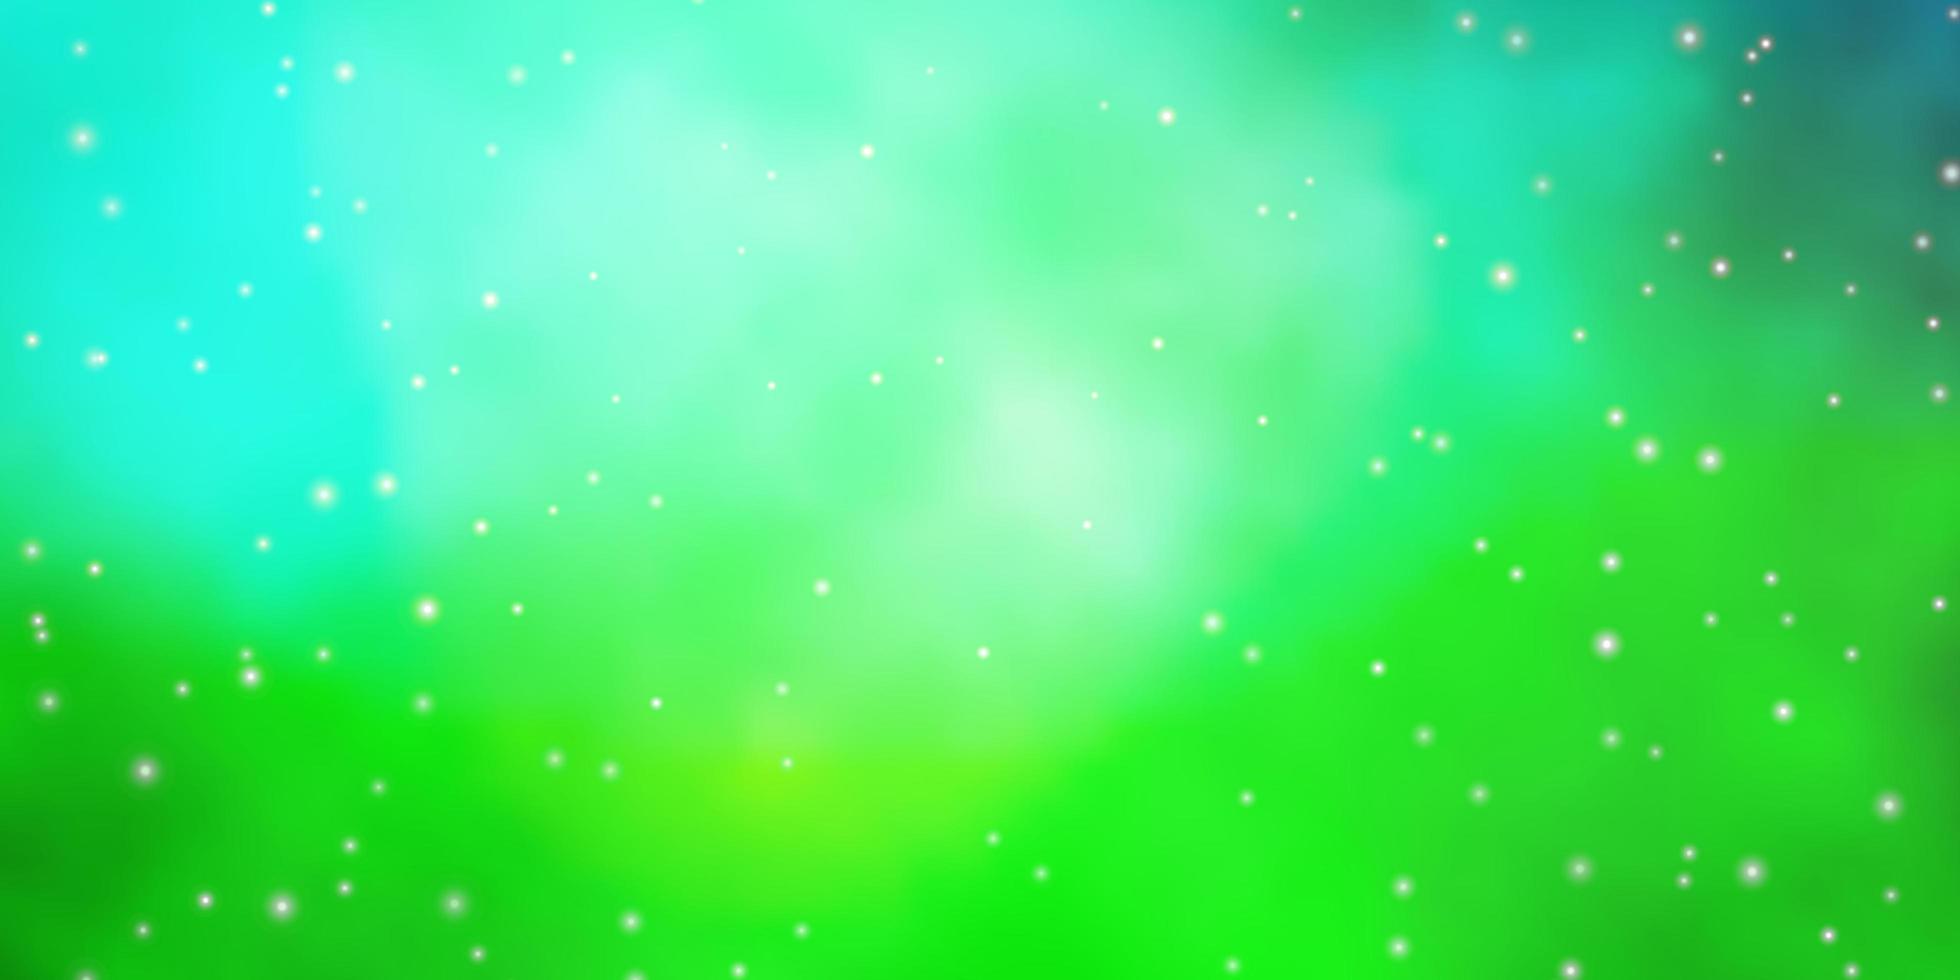 Light Green vector background with colorful stars